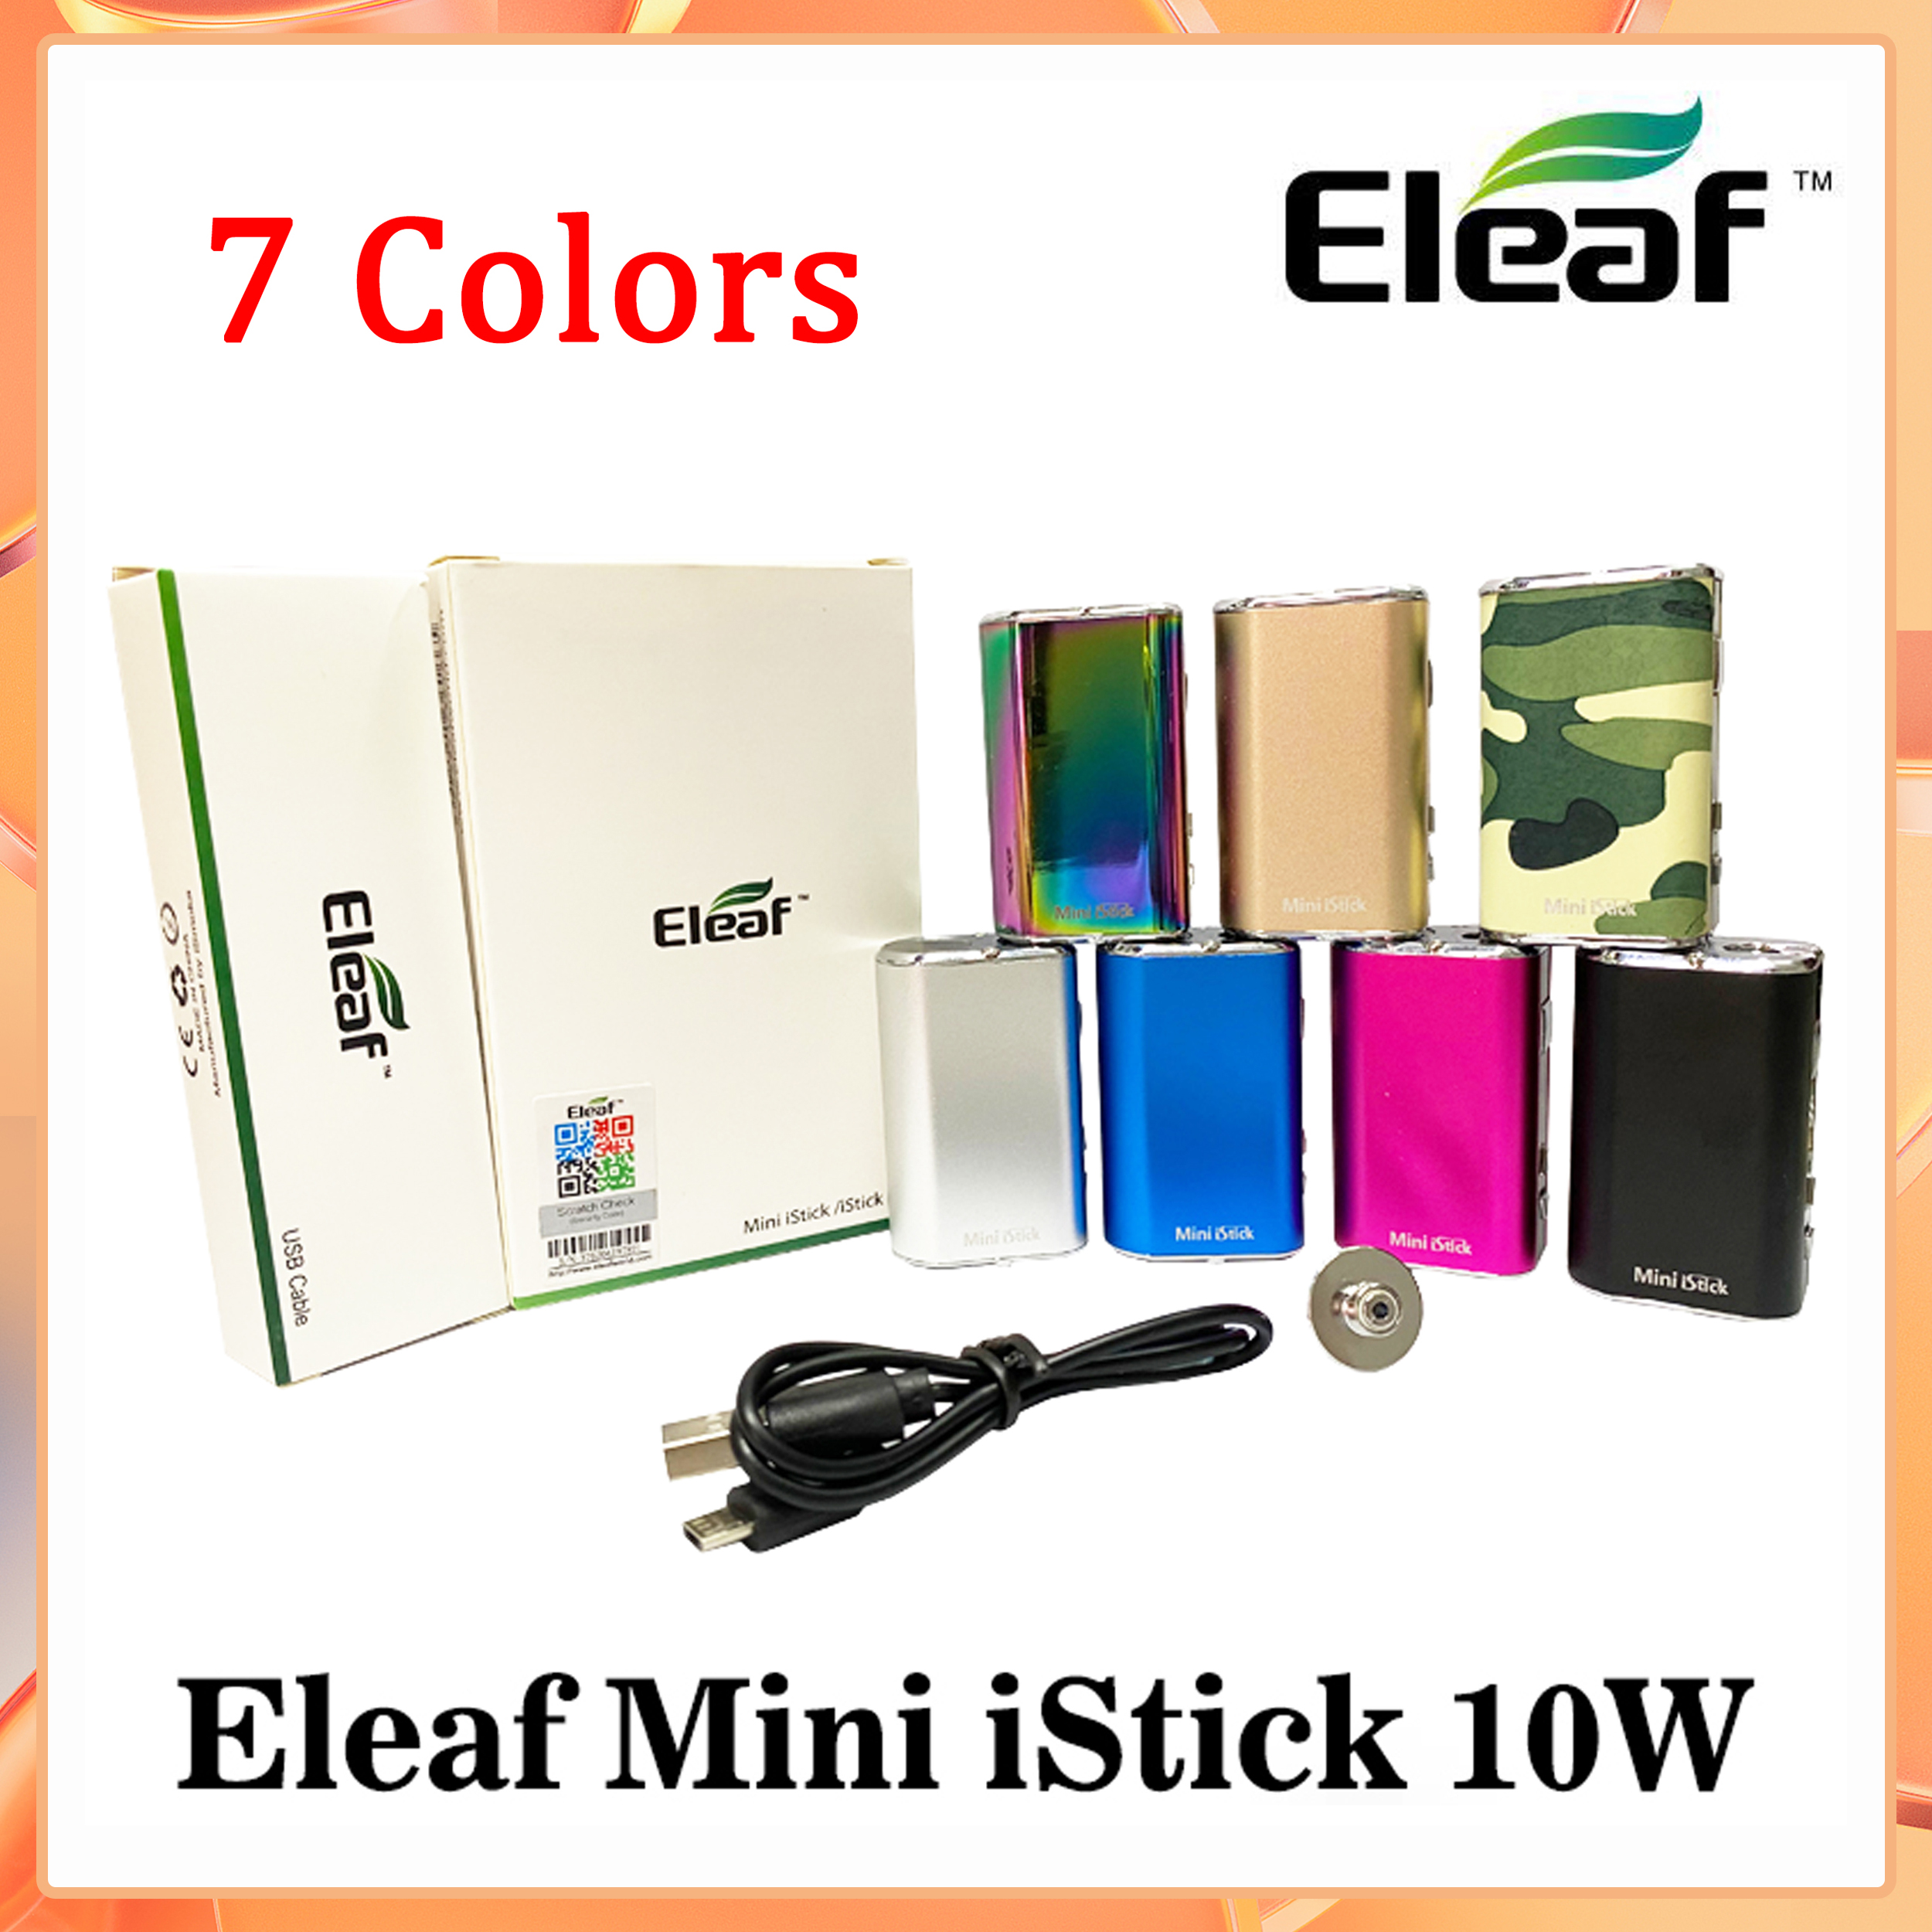 

Eleaf Mini iStick Kit 7 colors 1050mah Built-in Battery 10w Max Output Variable Voltage Mod with USB Cable eGo Connector Fast Send, Mixed this 4 colors